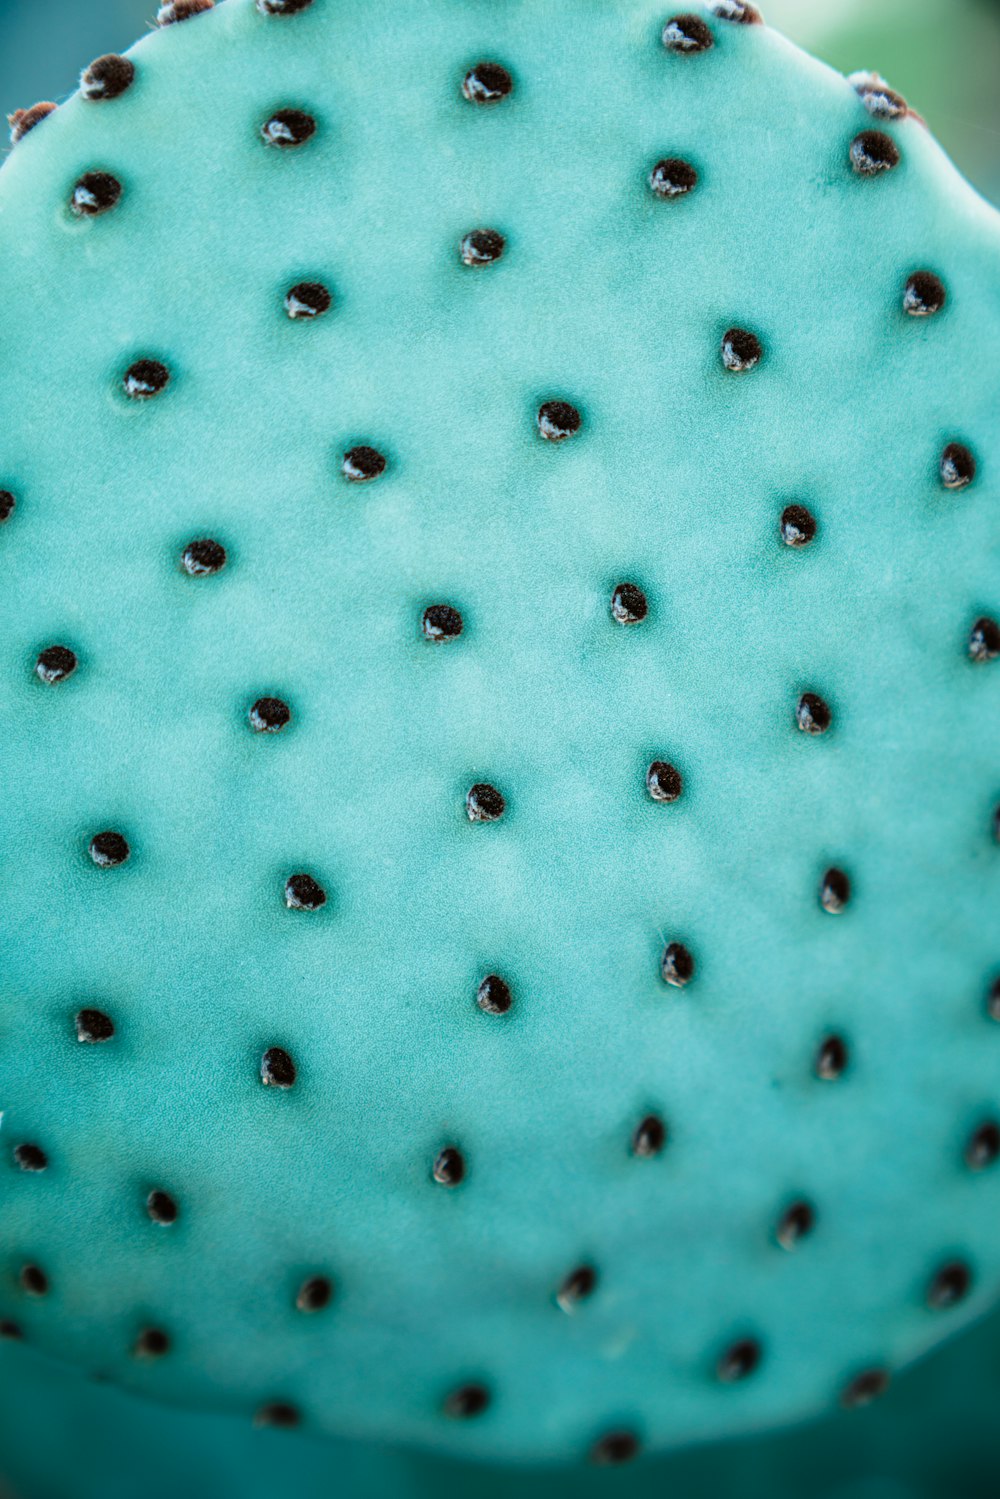 a close up view of a cactus's green surface